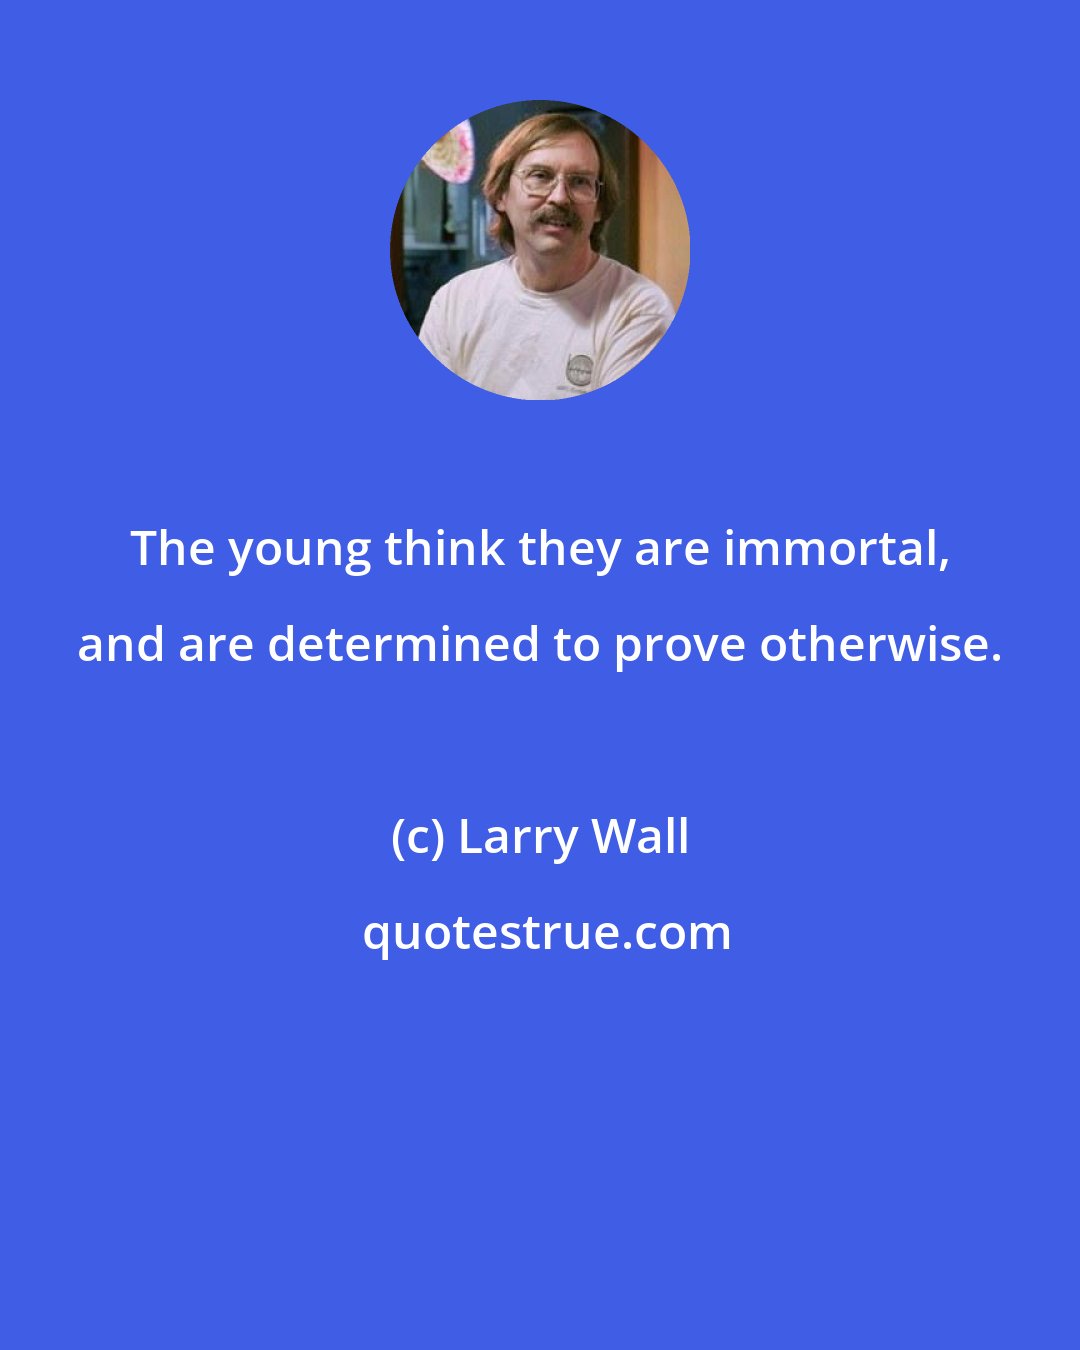 Larry Wall: The young think they are immortal, and are determined to prove otherwise.